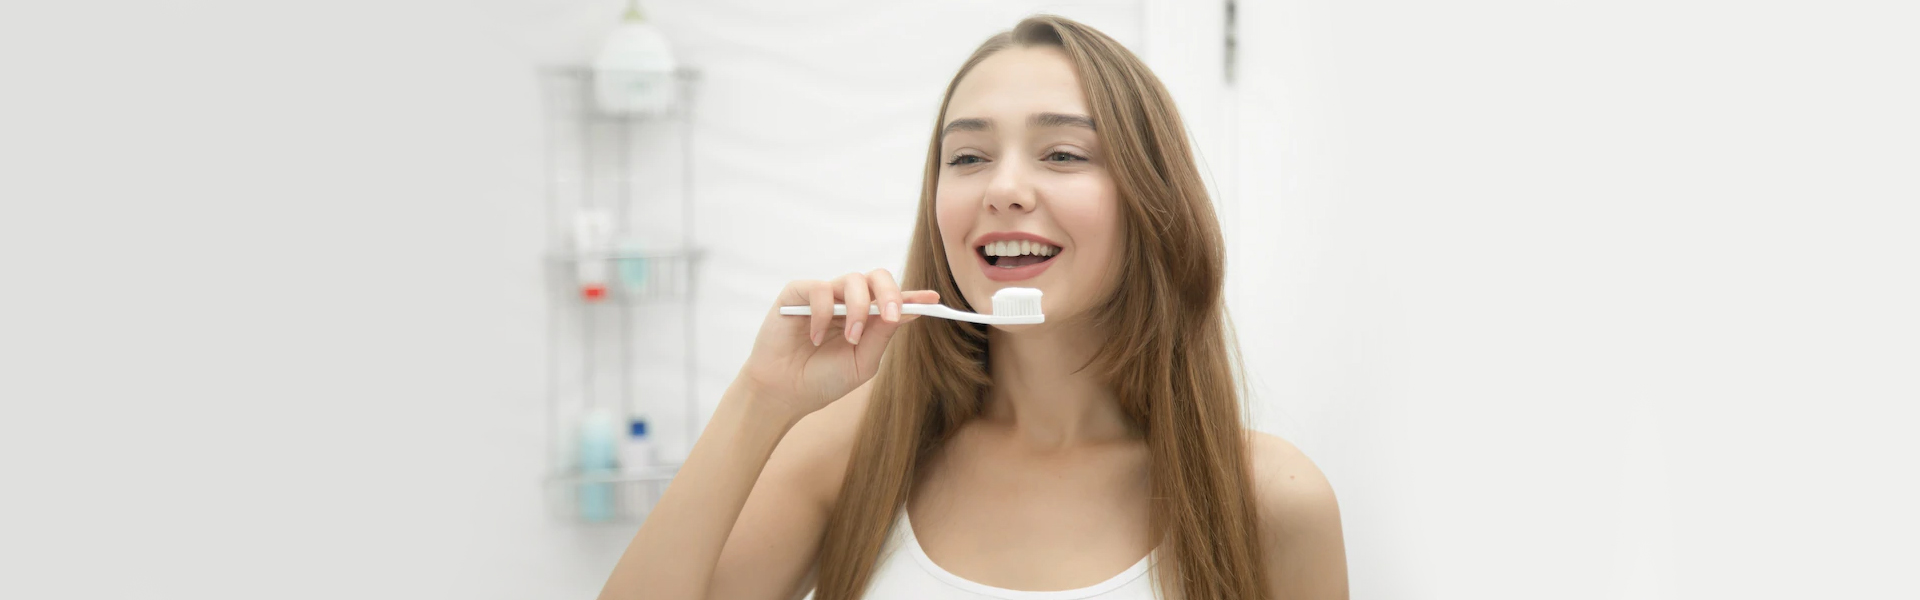 How Does Your Mouth Feel When You Don’t Use Fluoride Toothpaste Anymore?